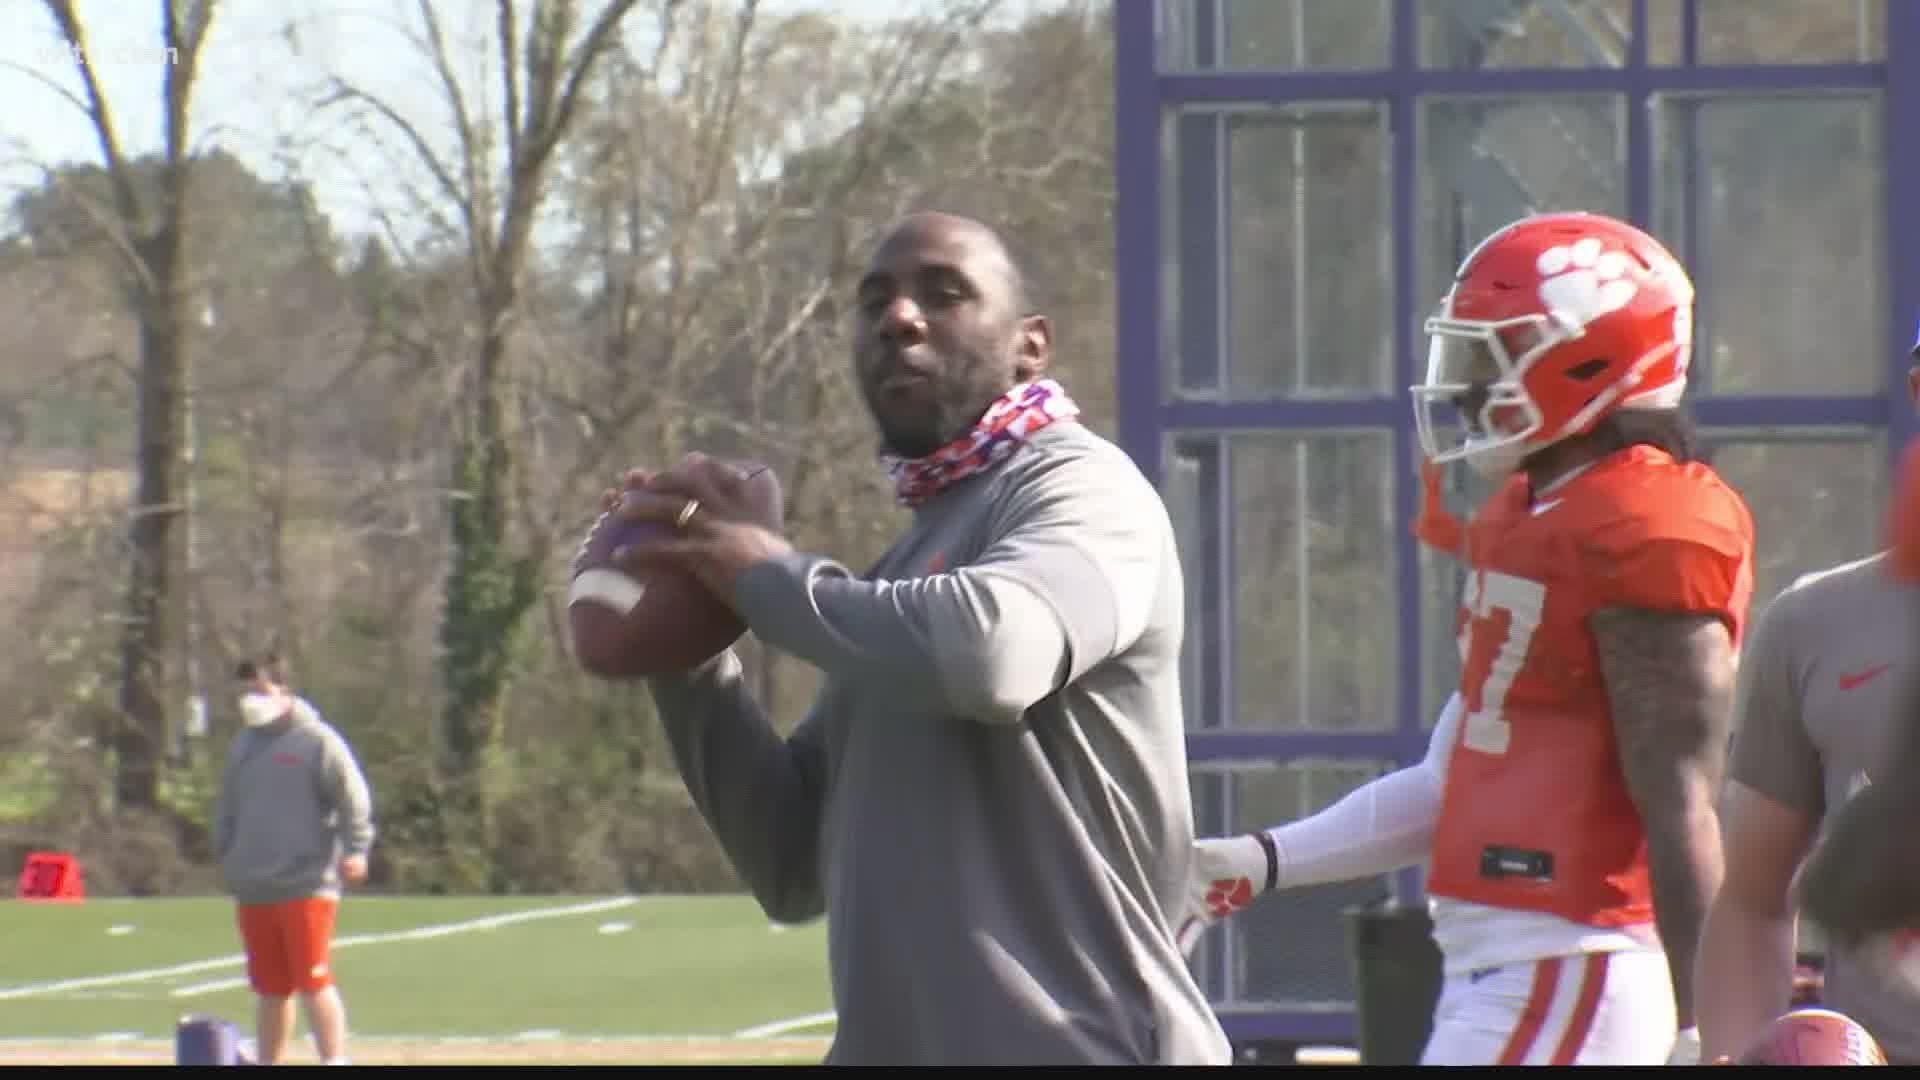 CJ Spiller played at a high level at Clemson and in the NFL. Now, he wants to pass along his knowledge to the next group of Tigers.